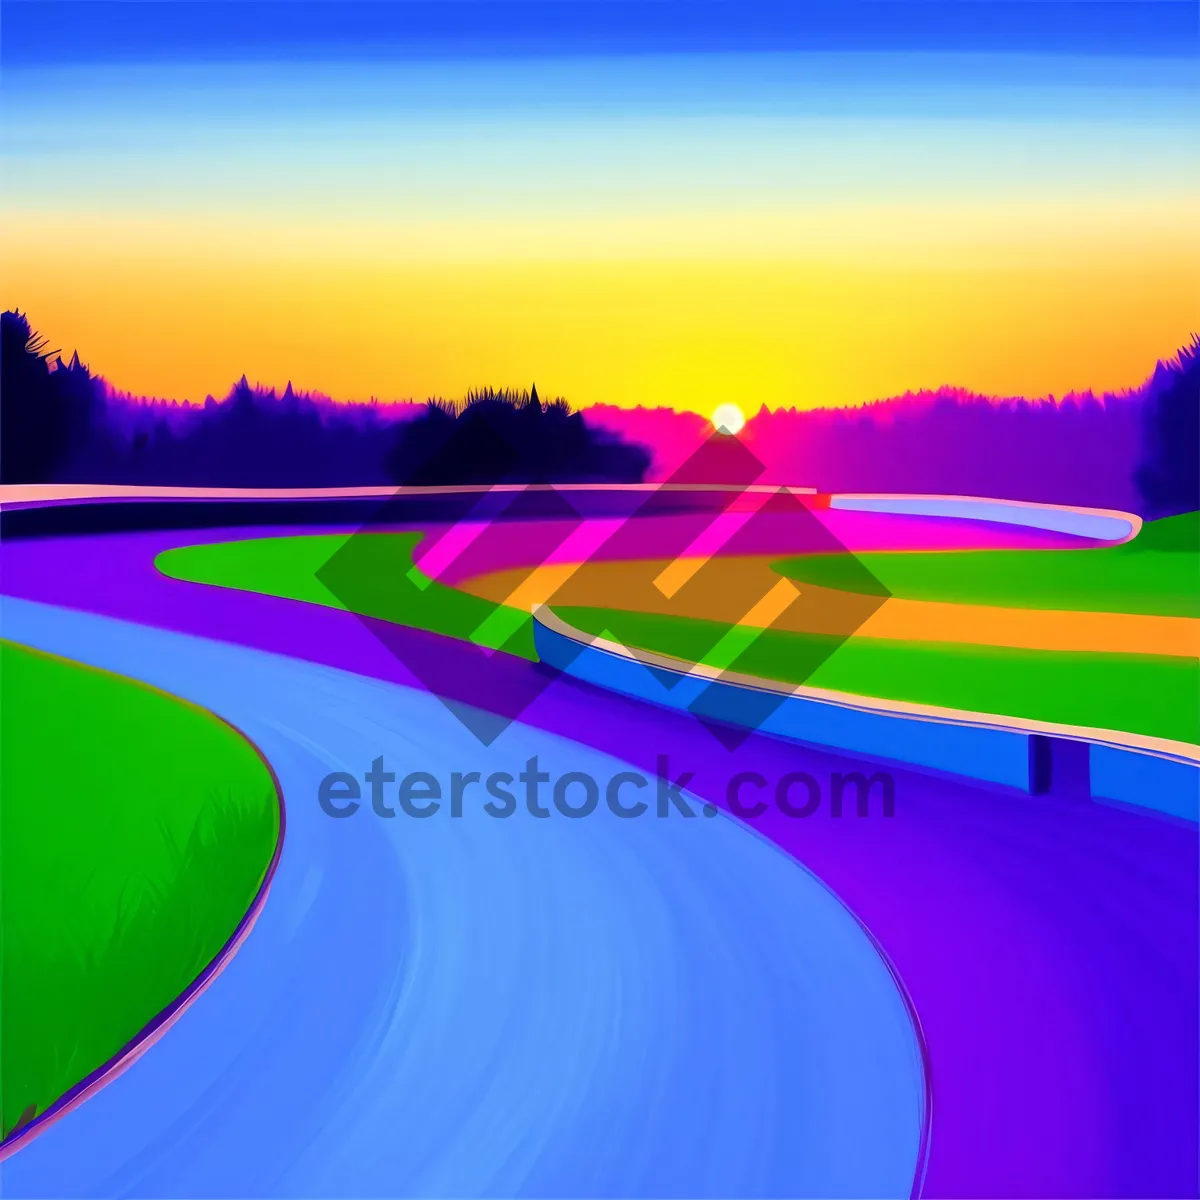 Picture of Rolling Hills and Open Road in Scenic Countryside